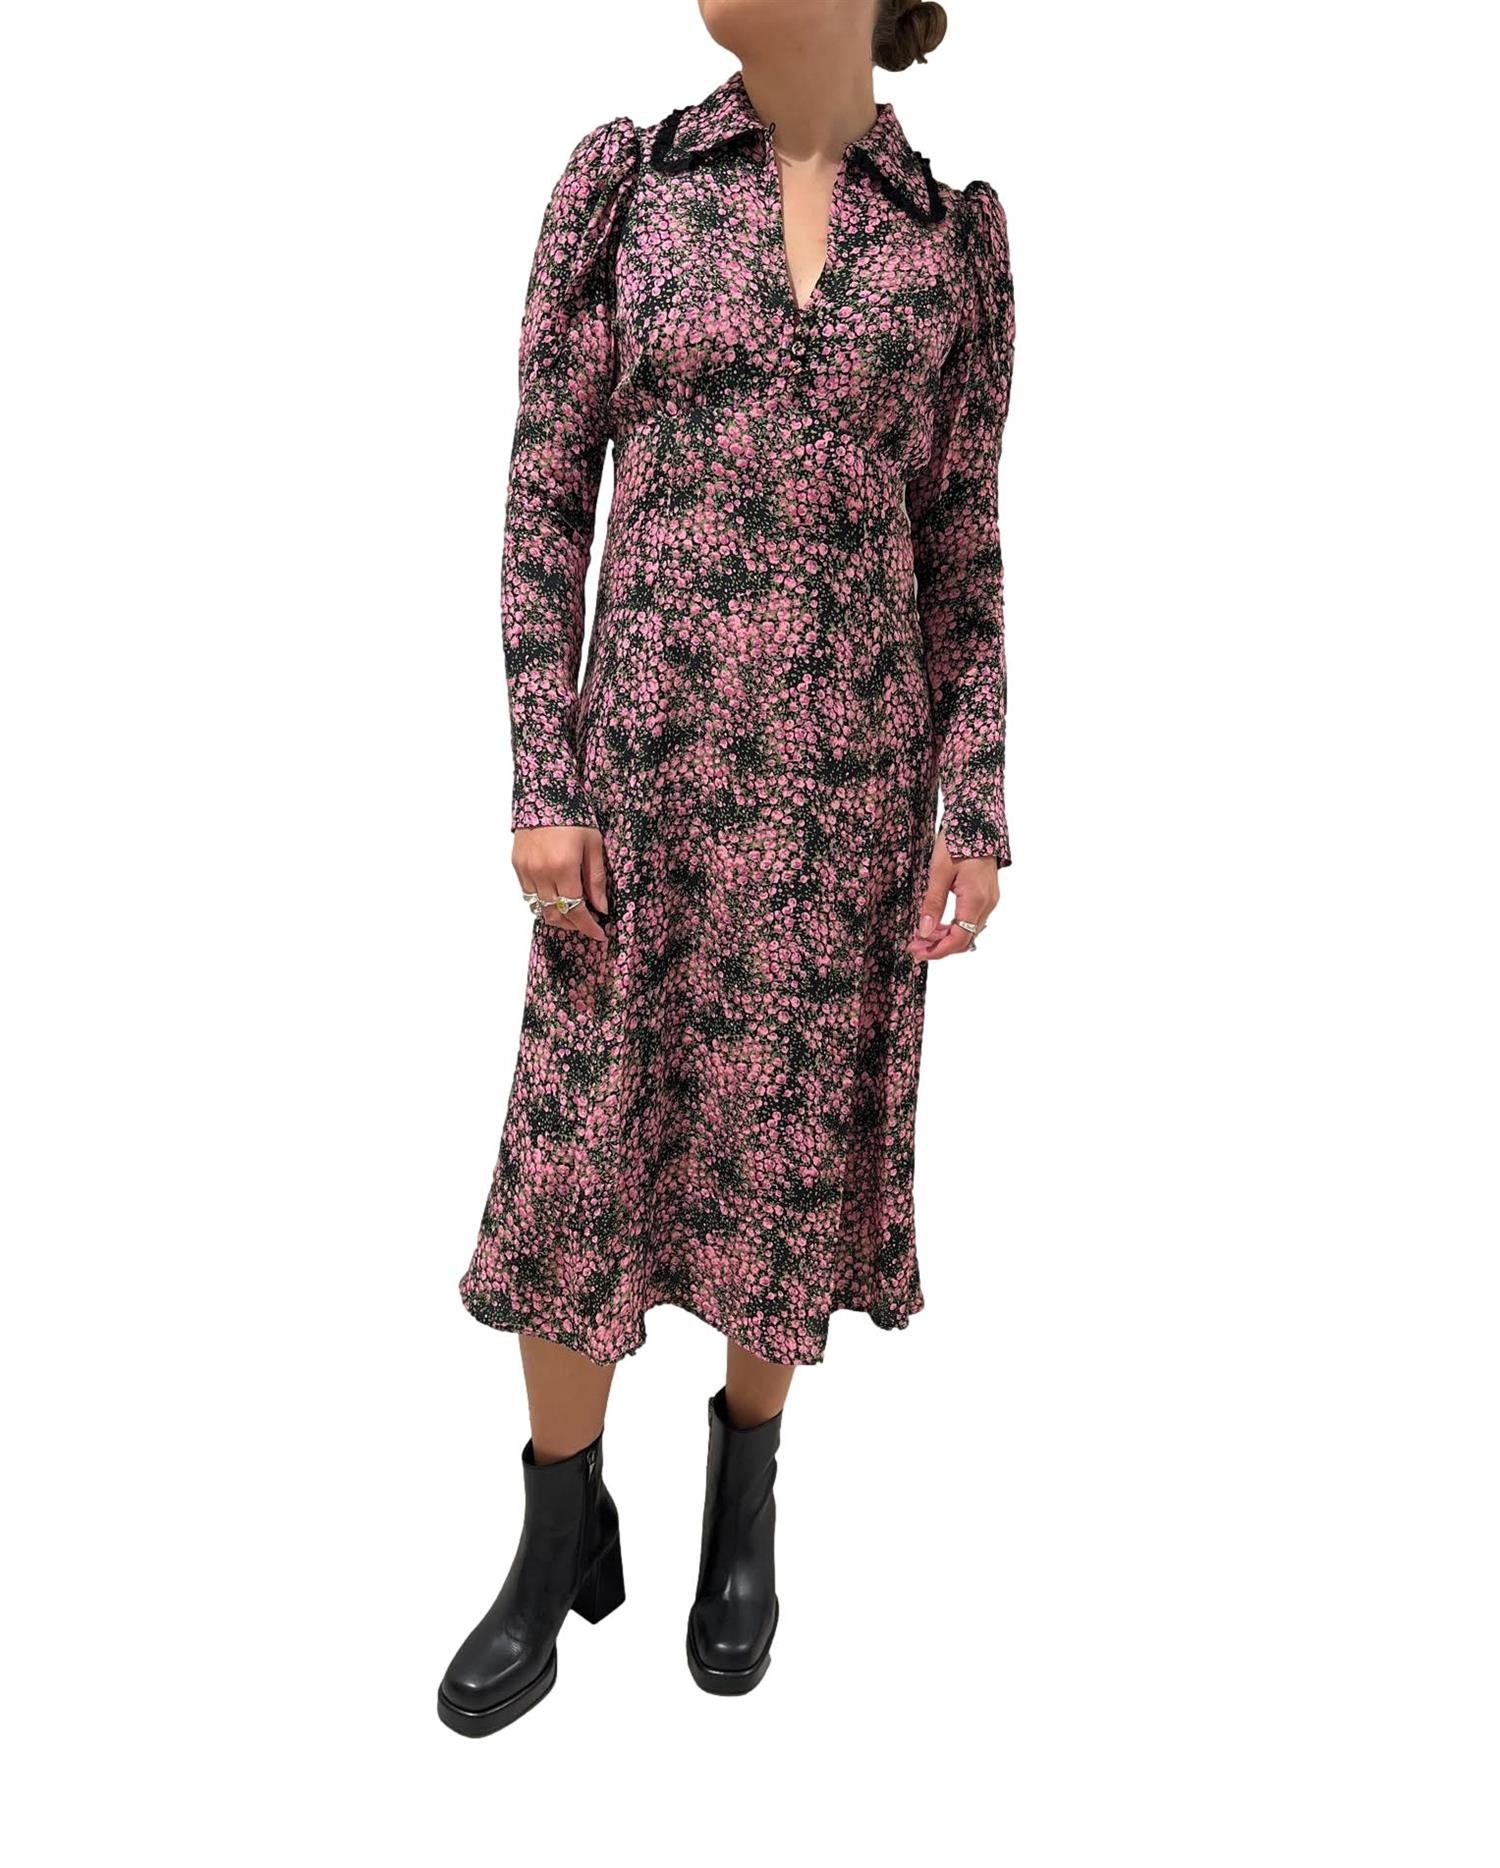 By TiMo Autumn Collar Dress Kjole Blomster - chrismoa.no